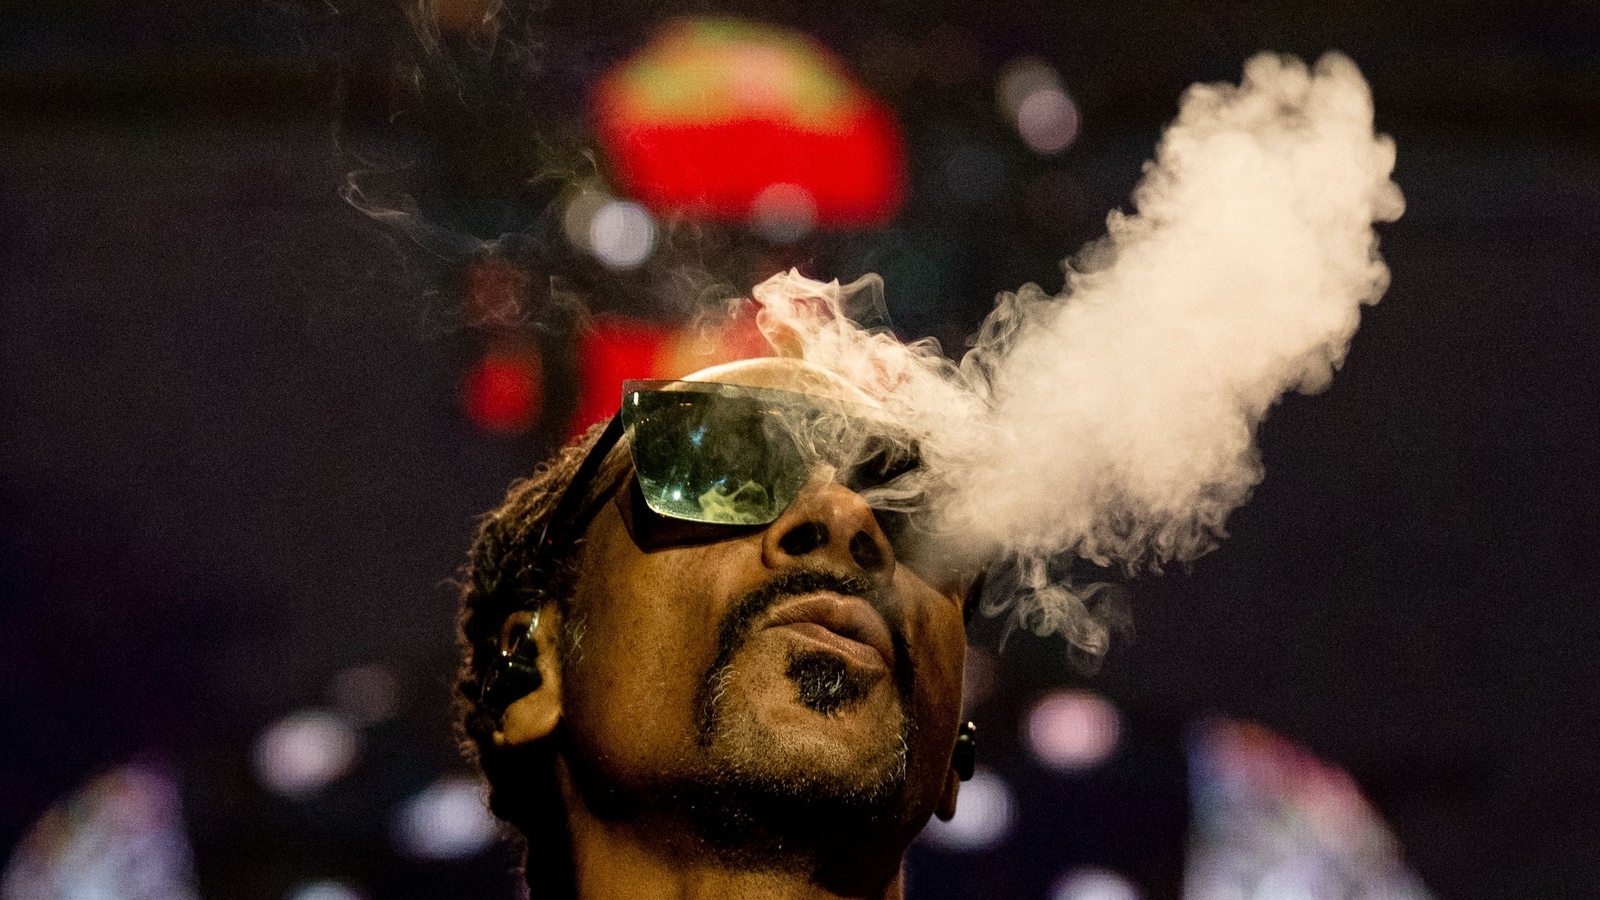 Snoop Dogg isn’t quitting weed, here’s what he really meant by ‘giving up smoke’